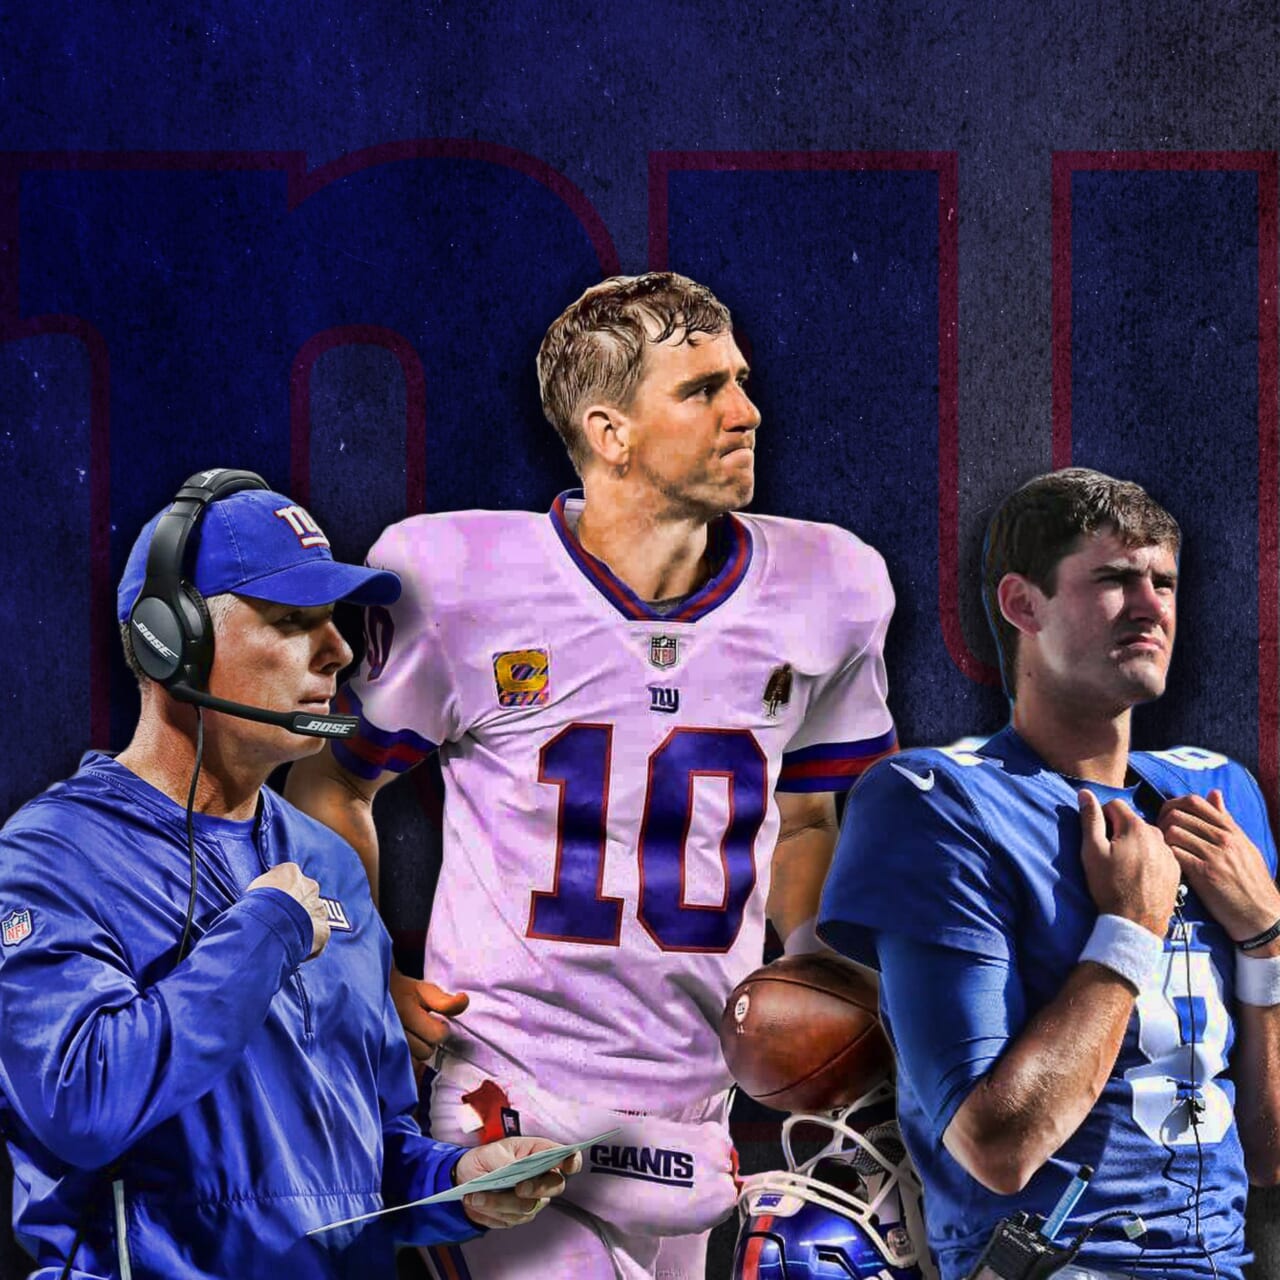 Eli Manning could finish out the season as Giants’ starter